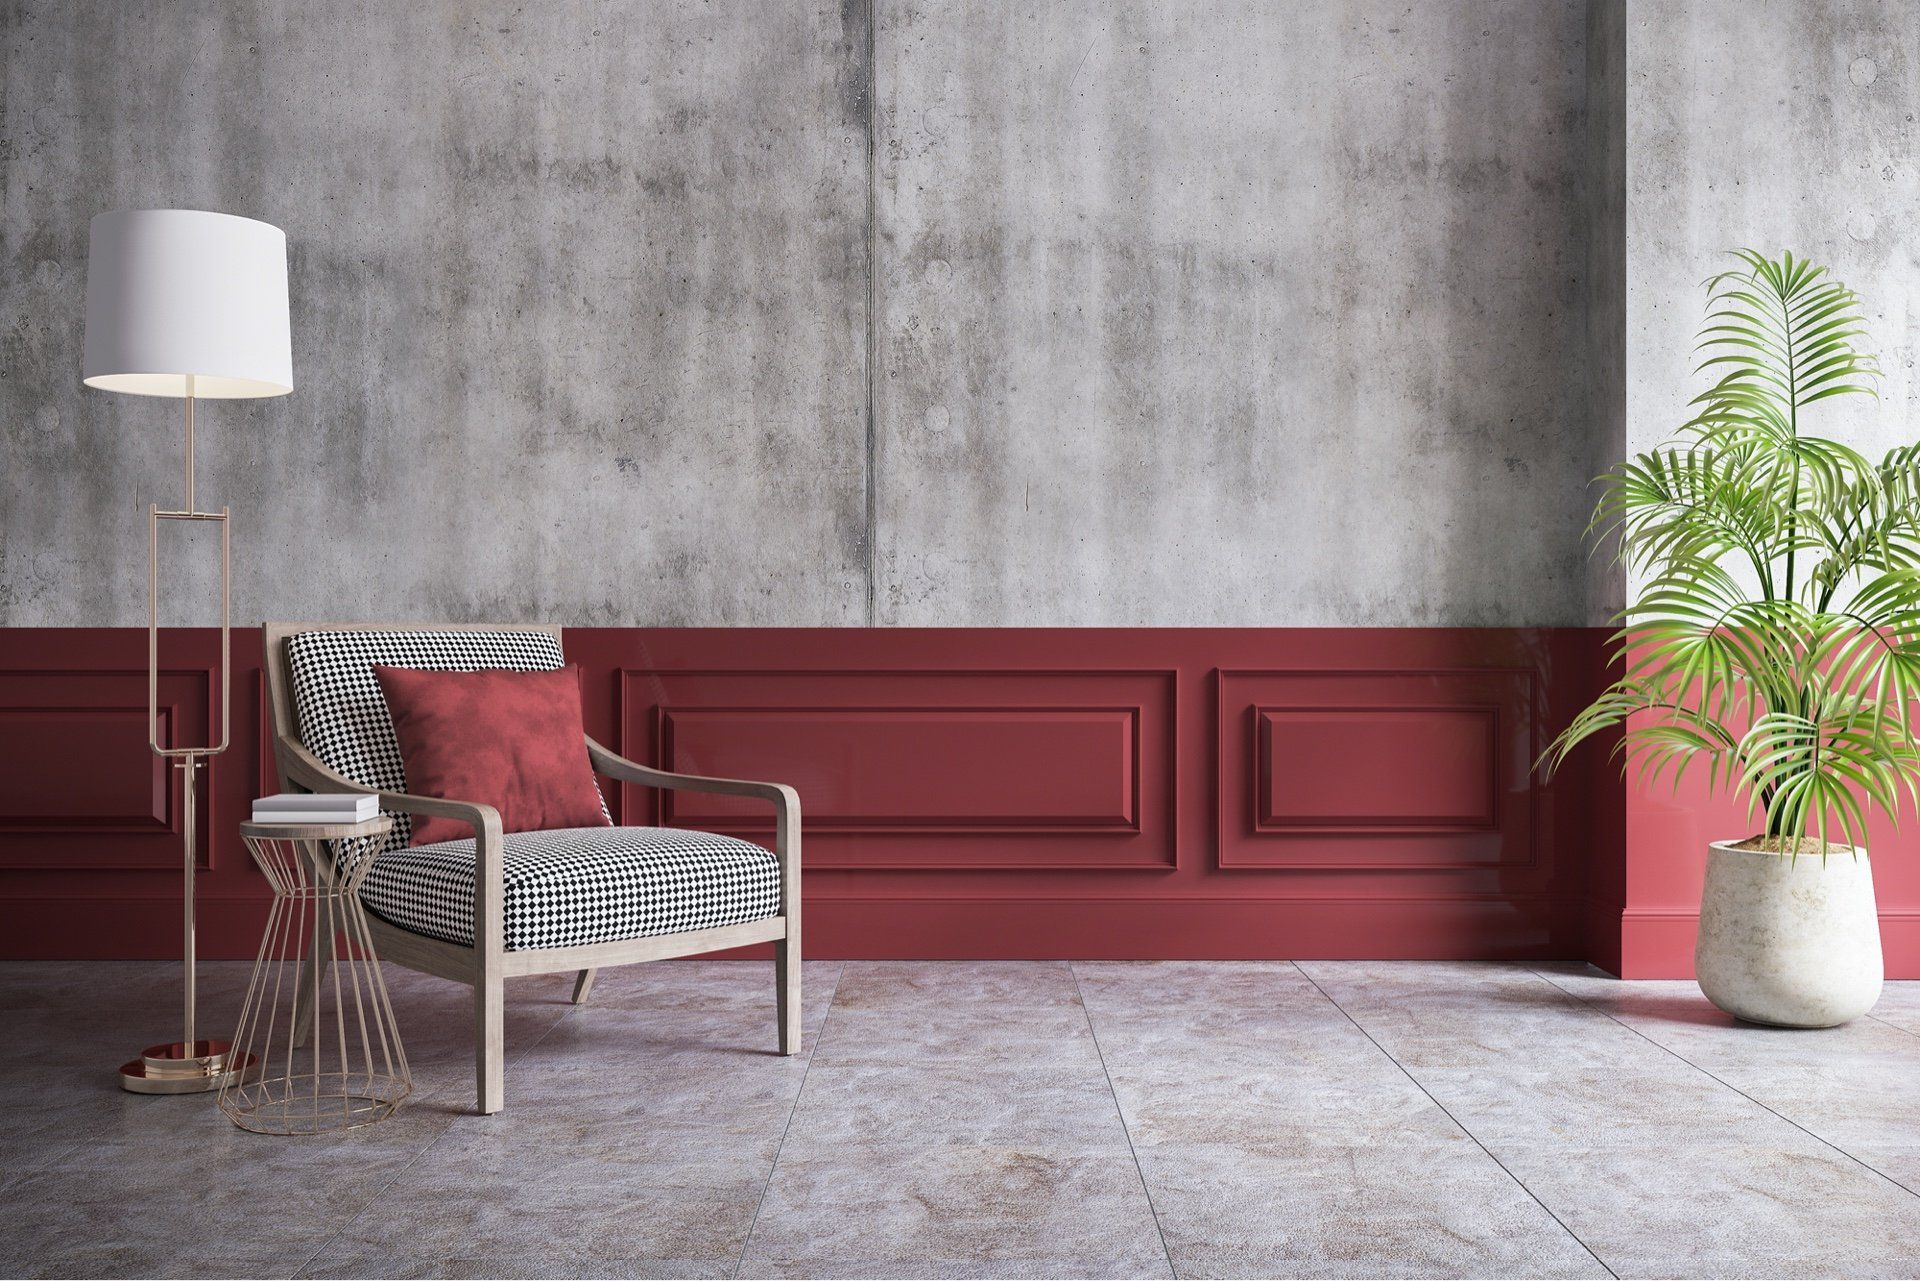 A picture of an accent wall painted burgundy and grey with wood panelling